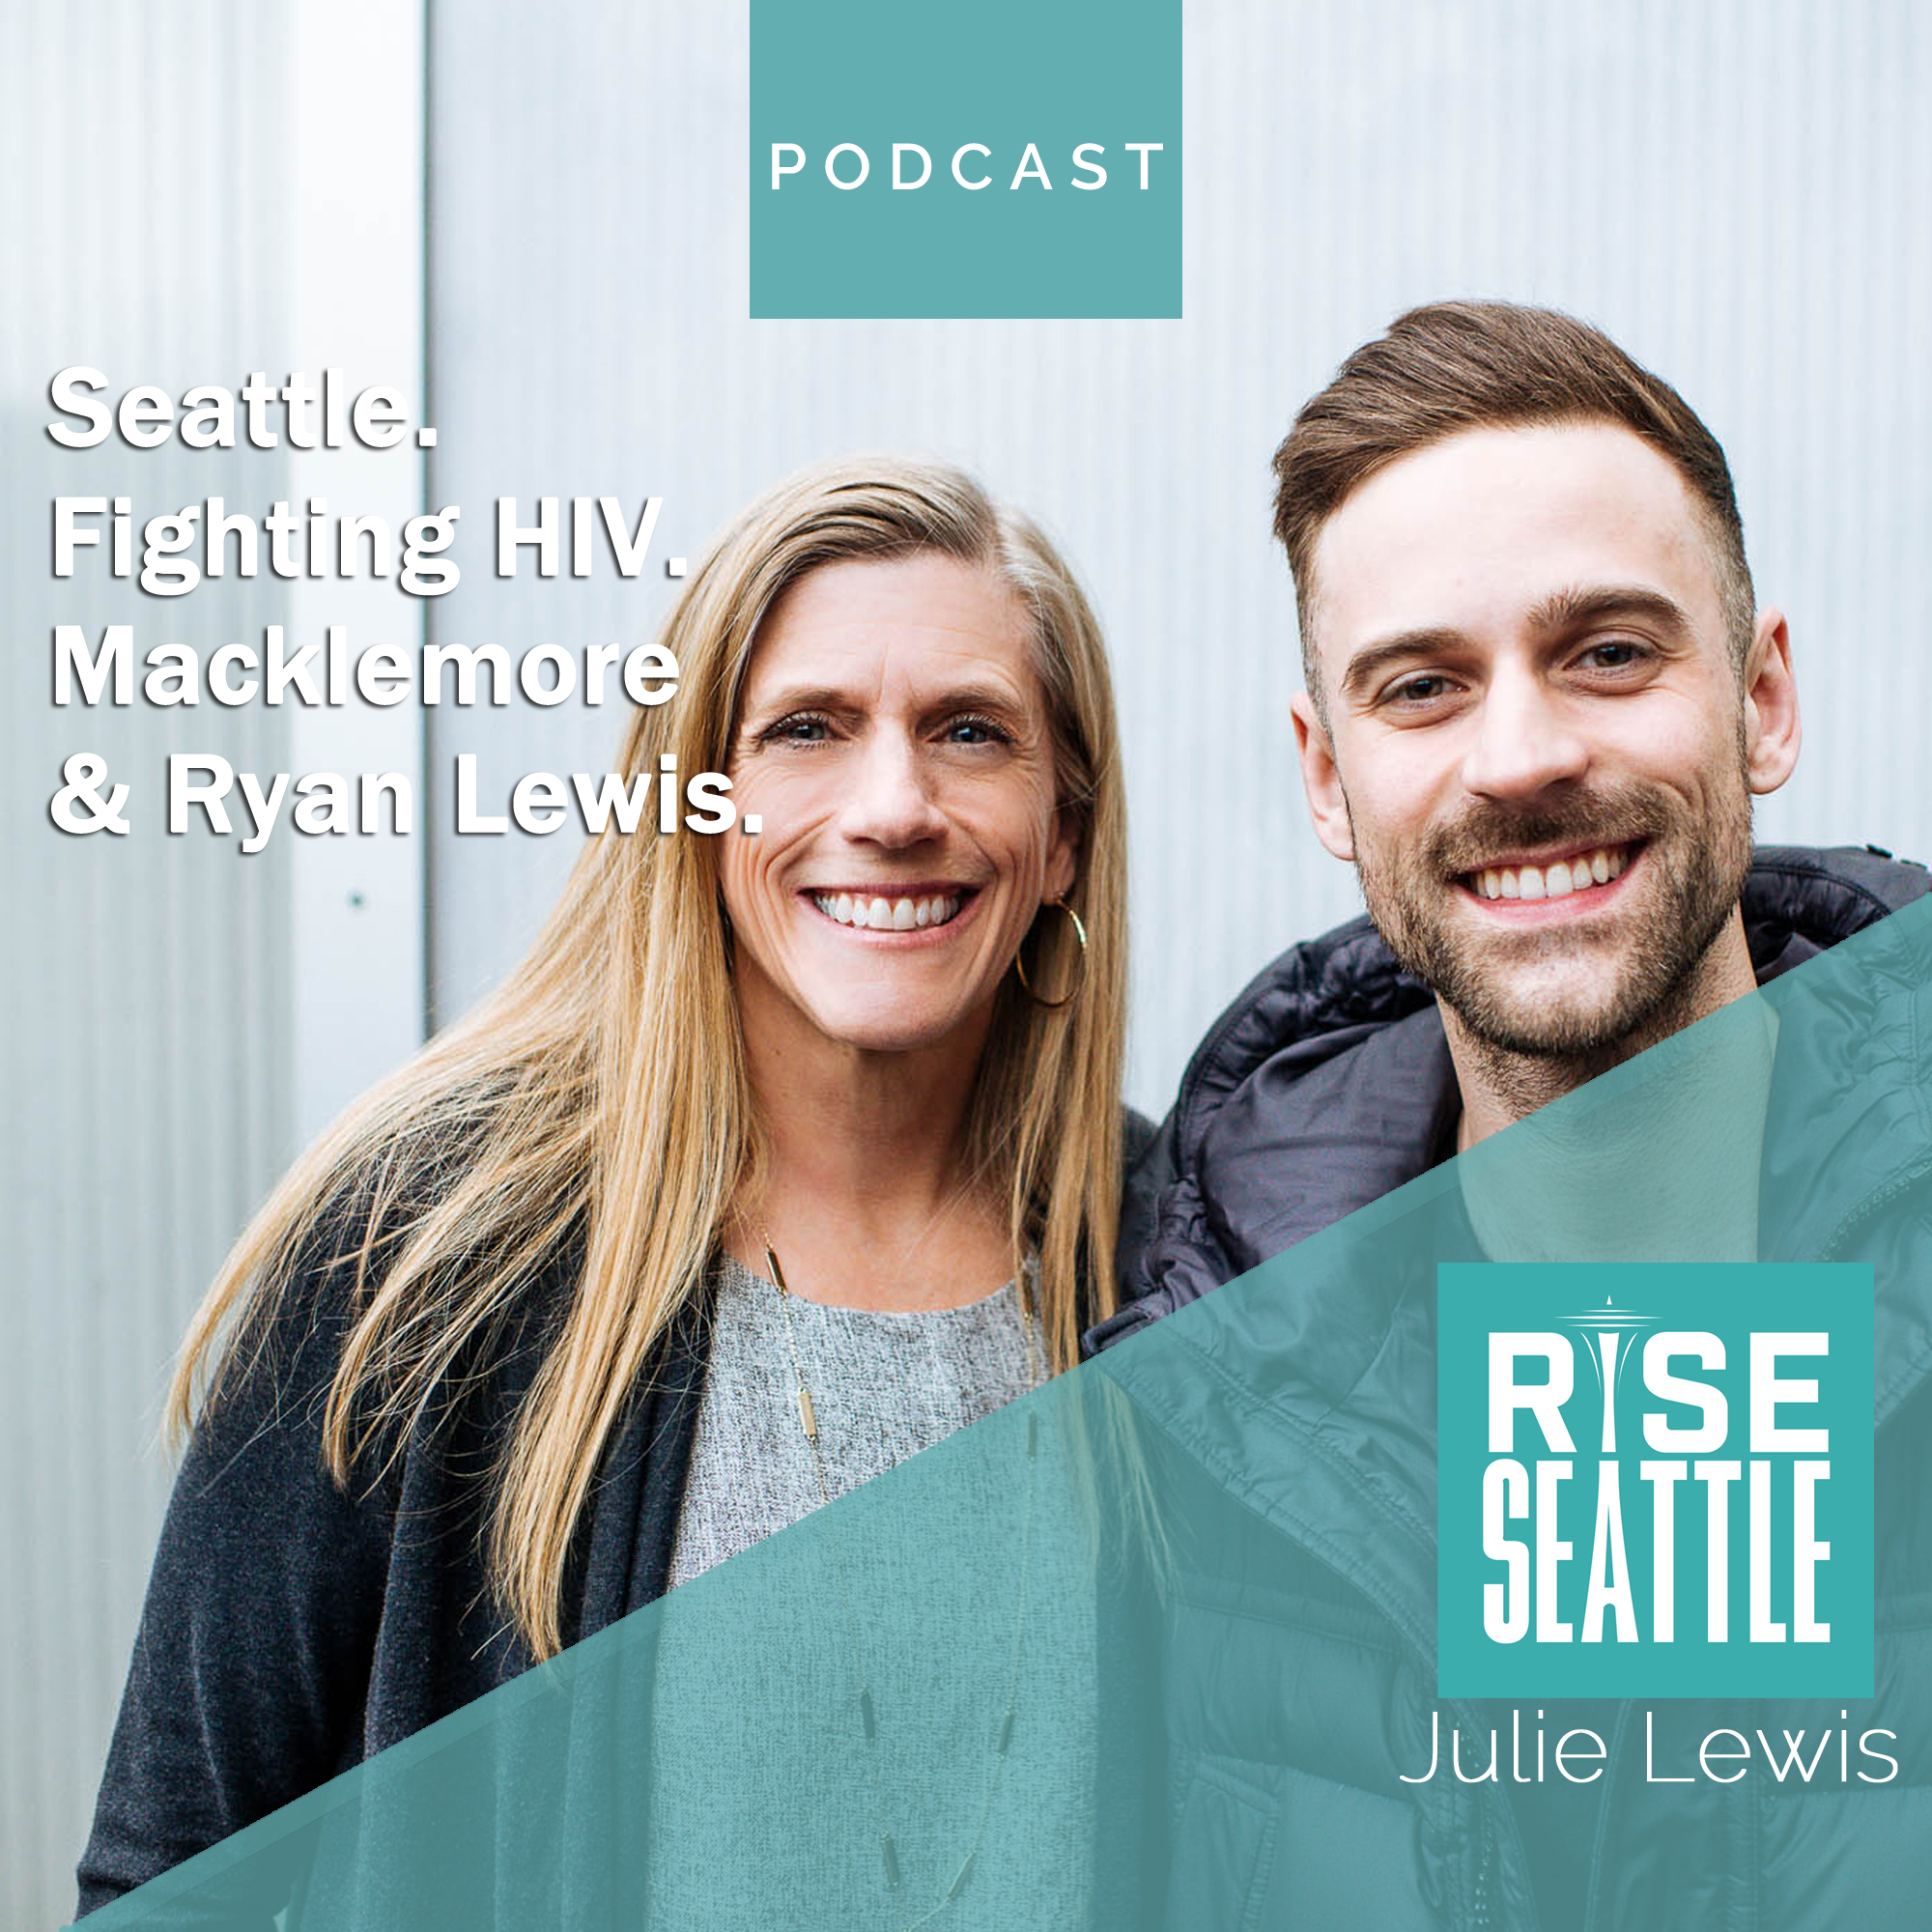 S1.E2. Julie Lewis: A Seattle local on surviving HIV and leaving a legacy